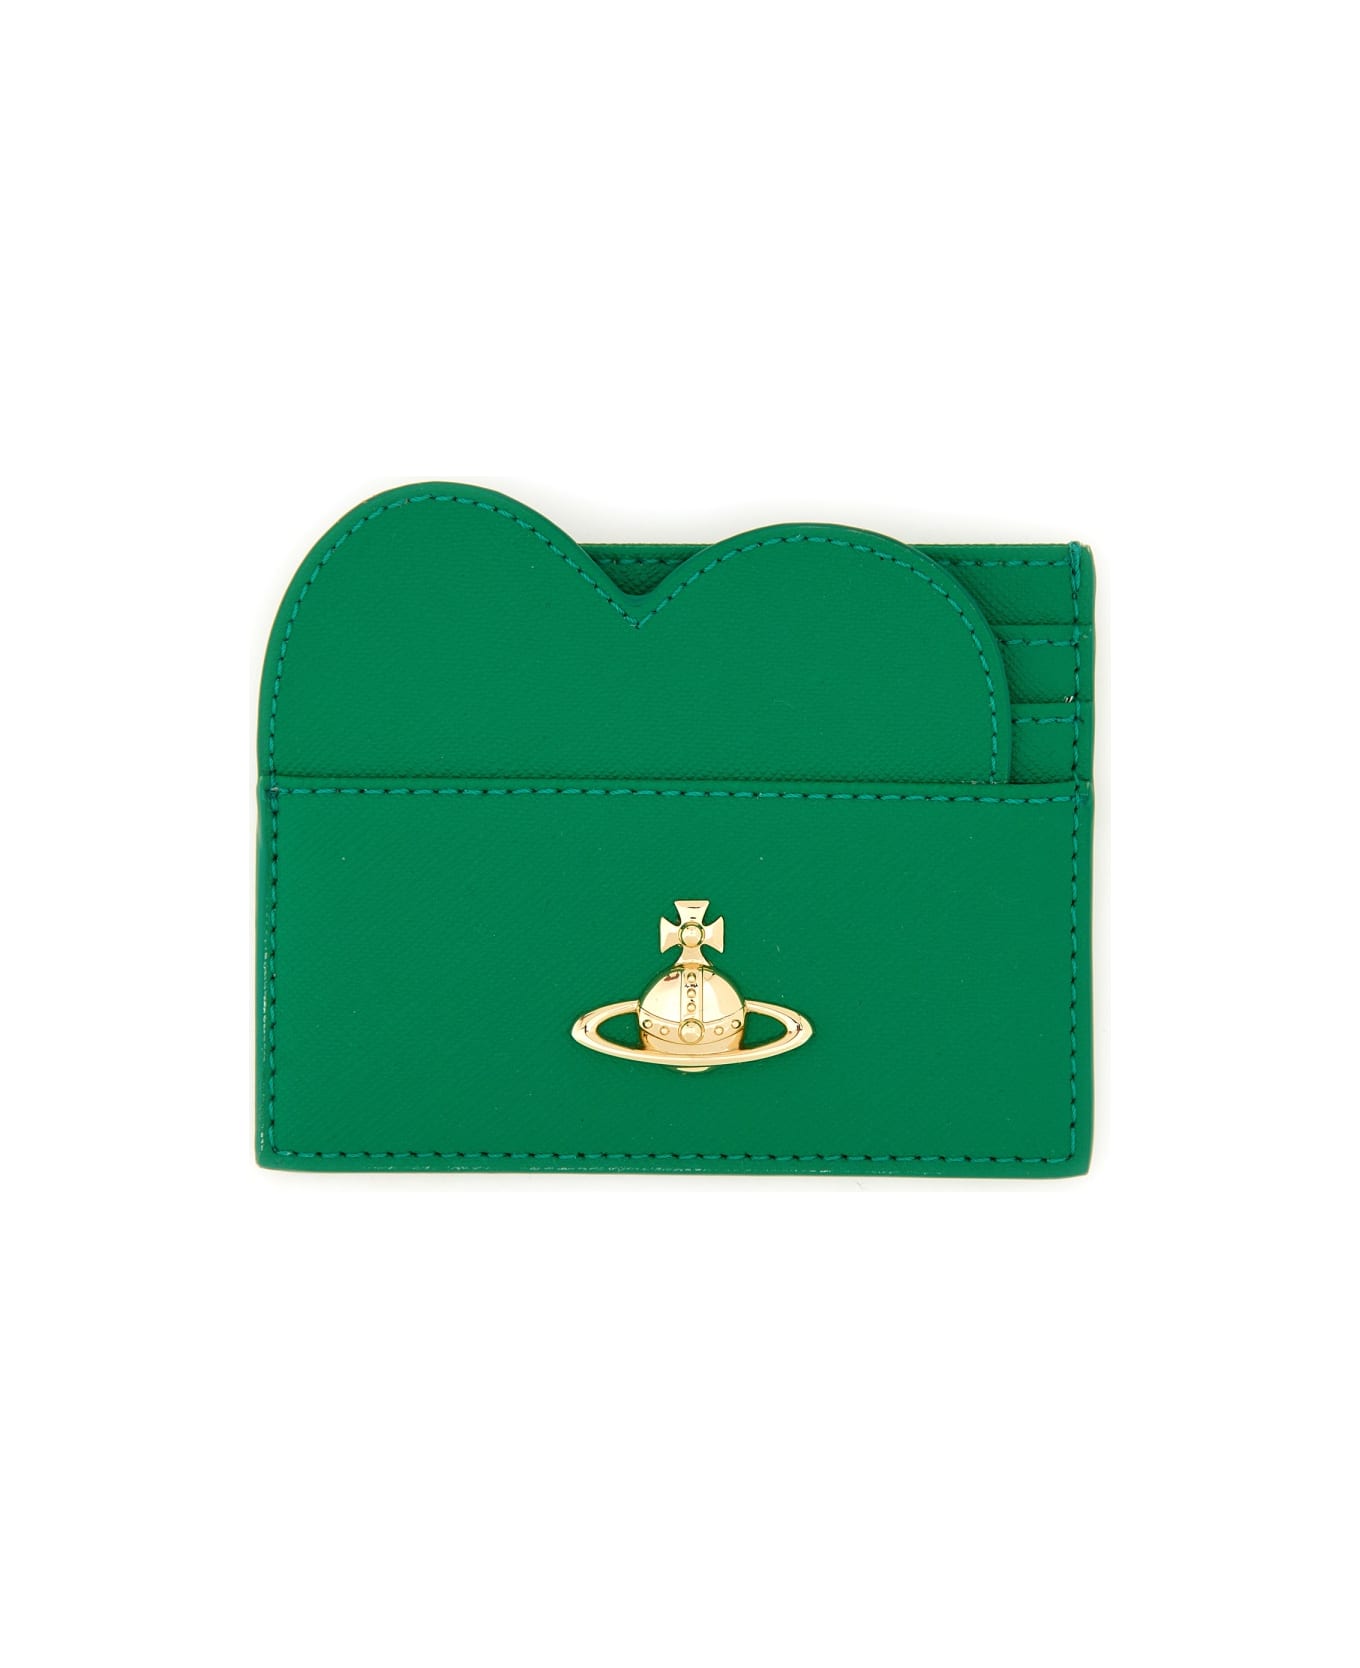 Vivienne Westwood Card Holder With Orb Embroidery - GREEN